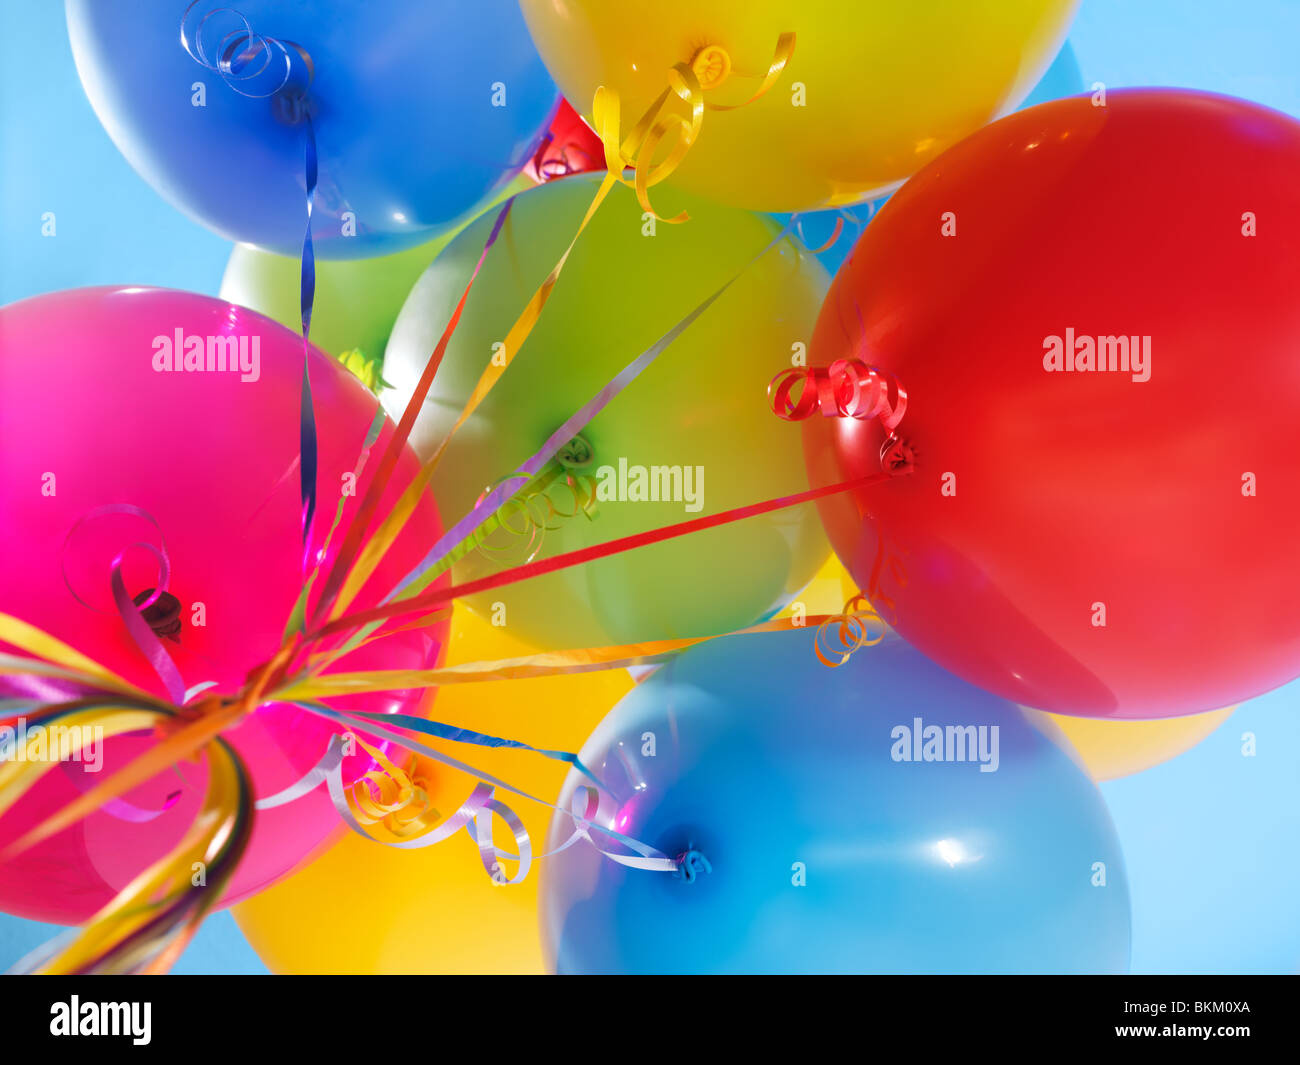 Colorful air balloons over blue sky background Stock Photo